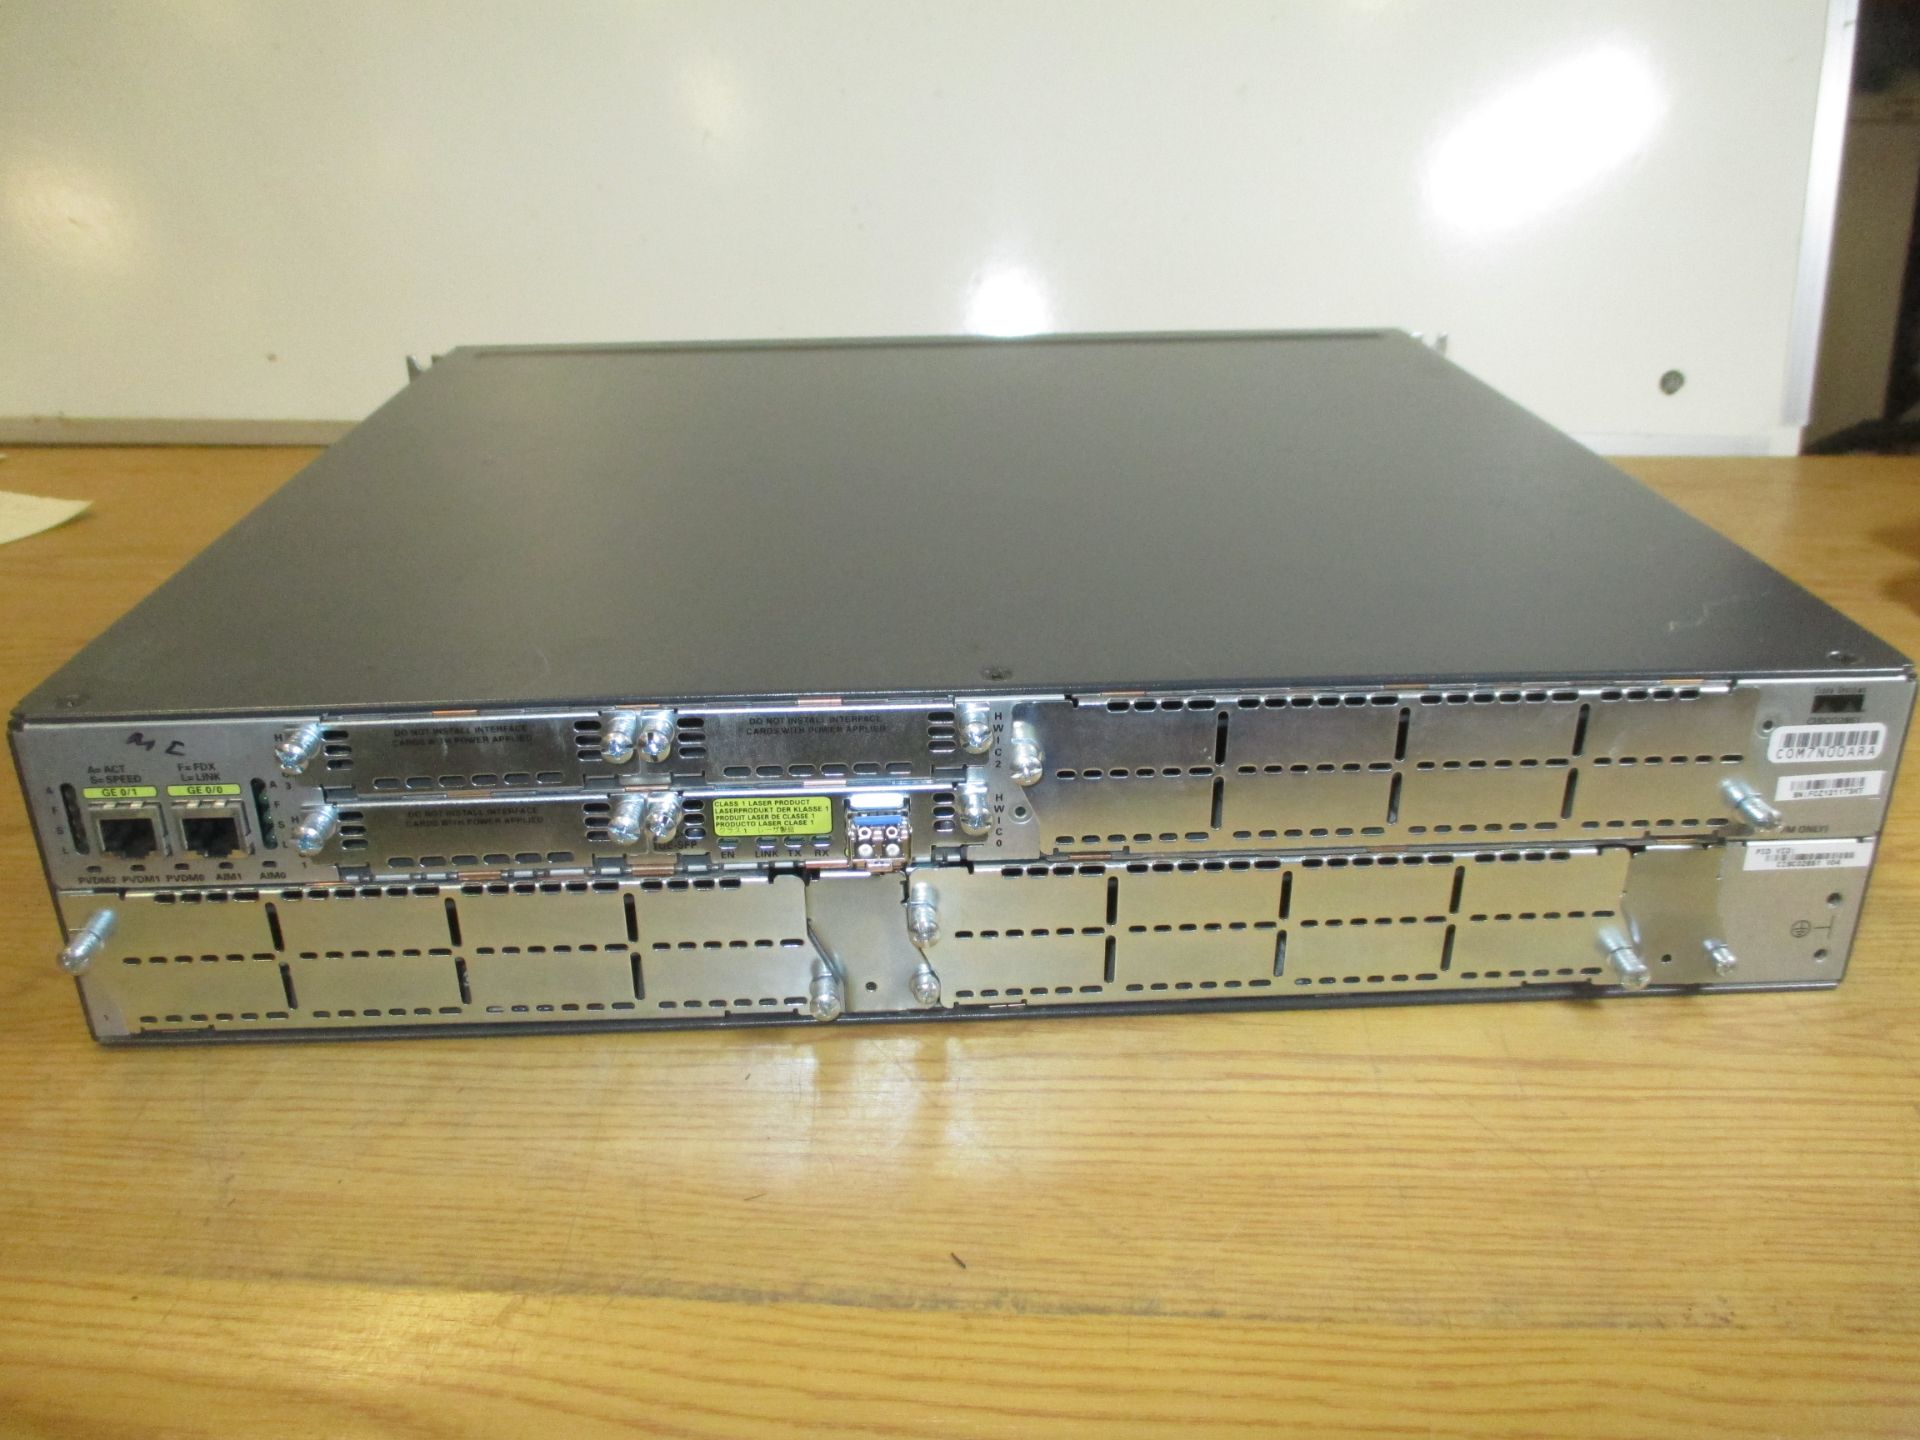 CISCO 2800 SERIES INTEGRATED SERVICES ROUTER. MODEL CISCO2851 V04. WITH 1 X HWIC-1GE-SFP. - Image 2 of 2